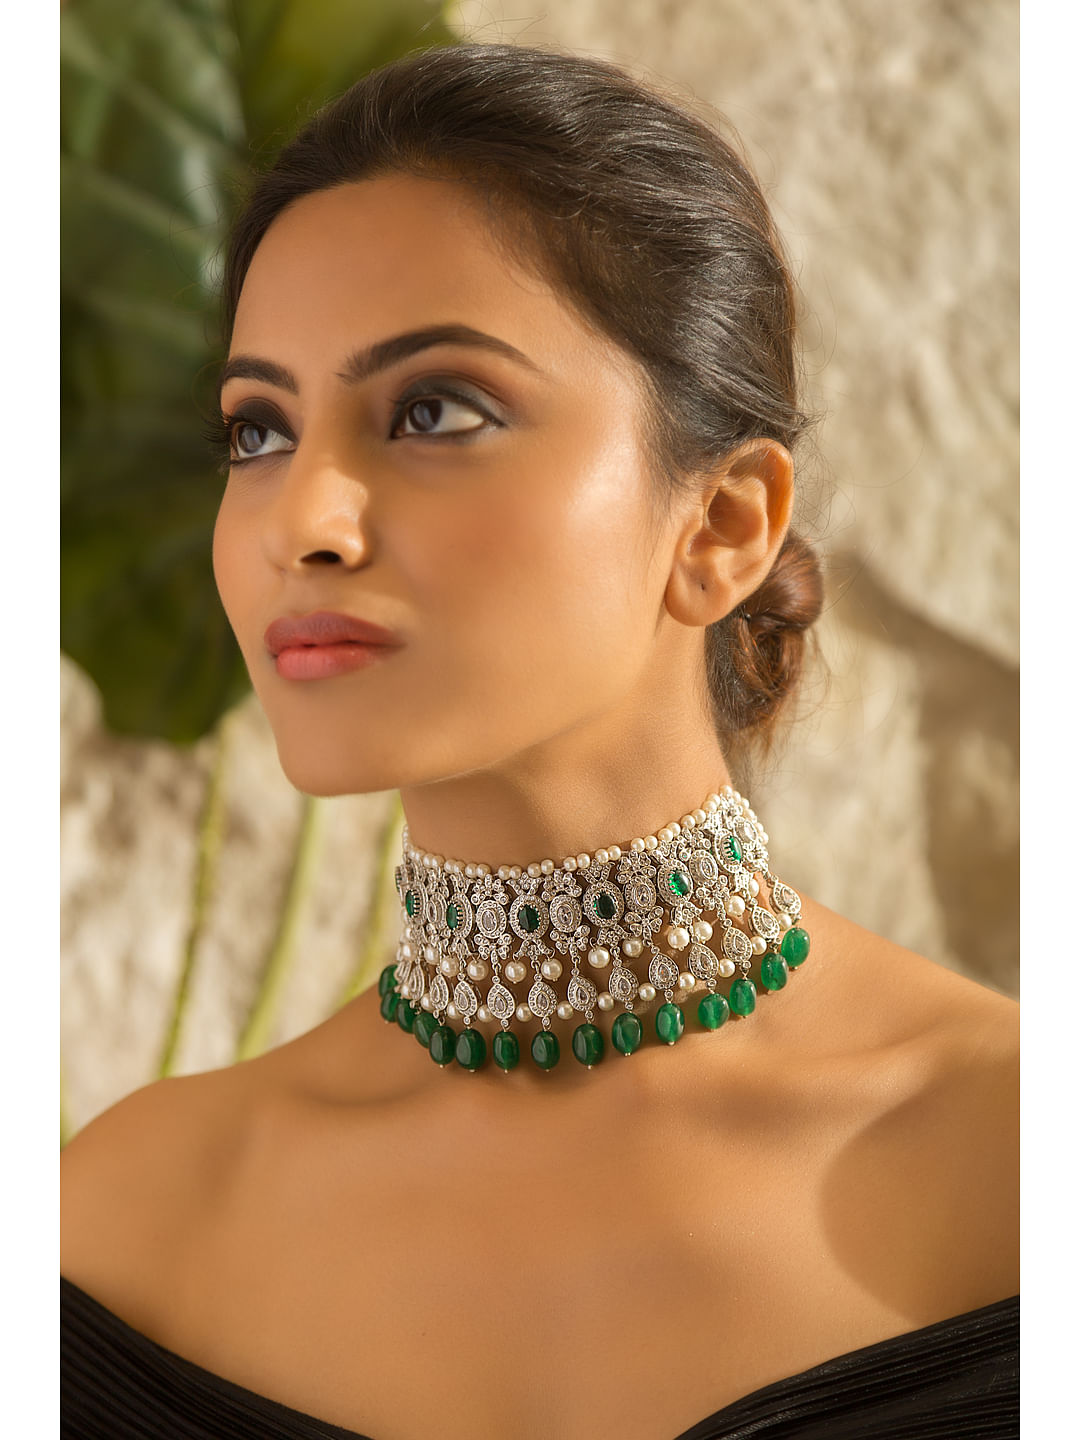 Buy Choker Necklace Set, Chokers for Women Online: Ajnaa Jewels